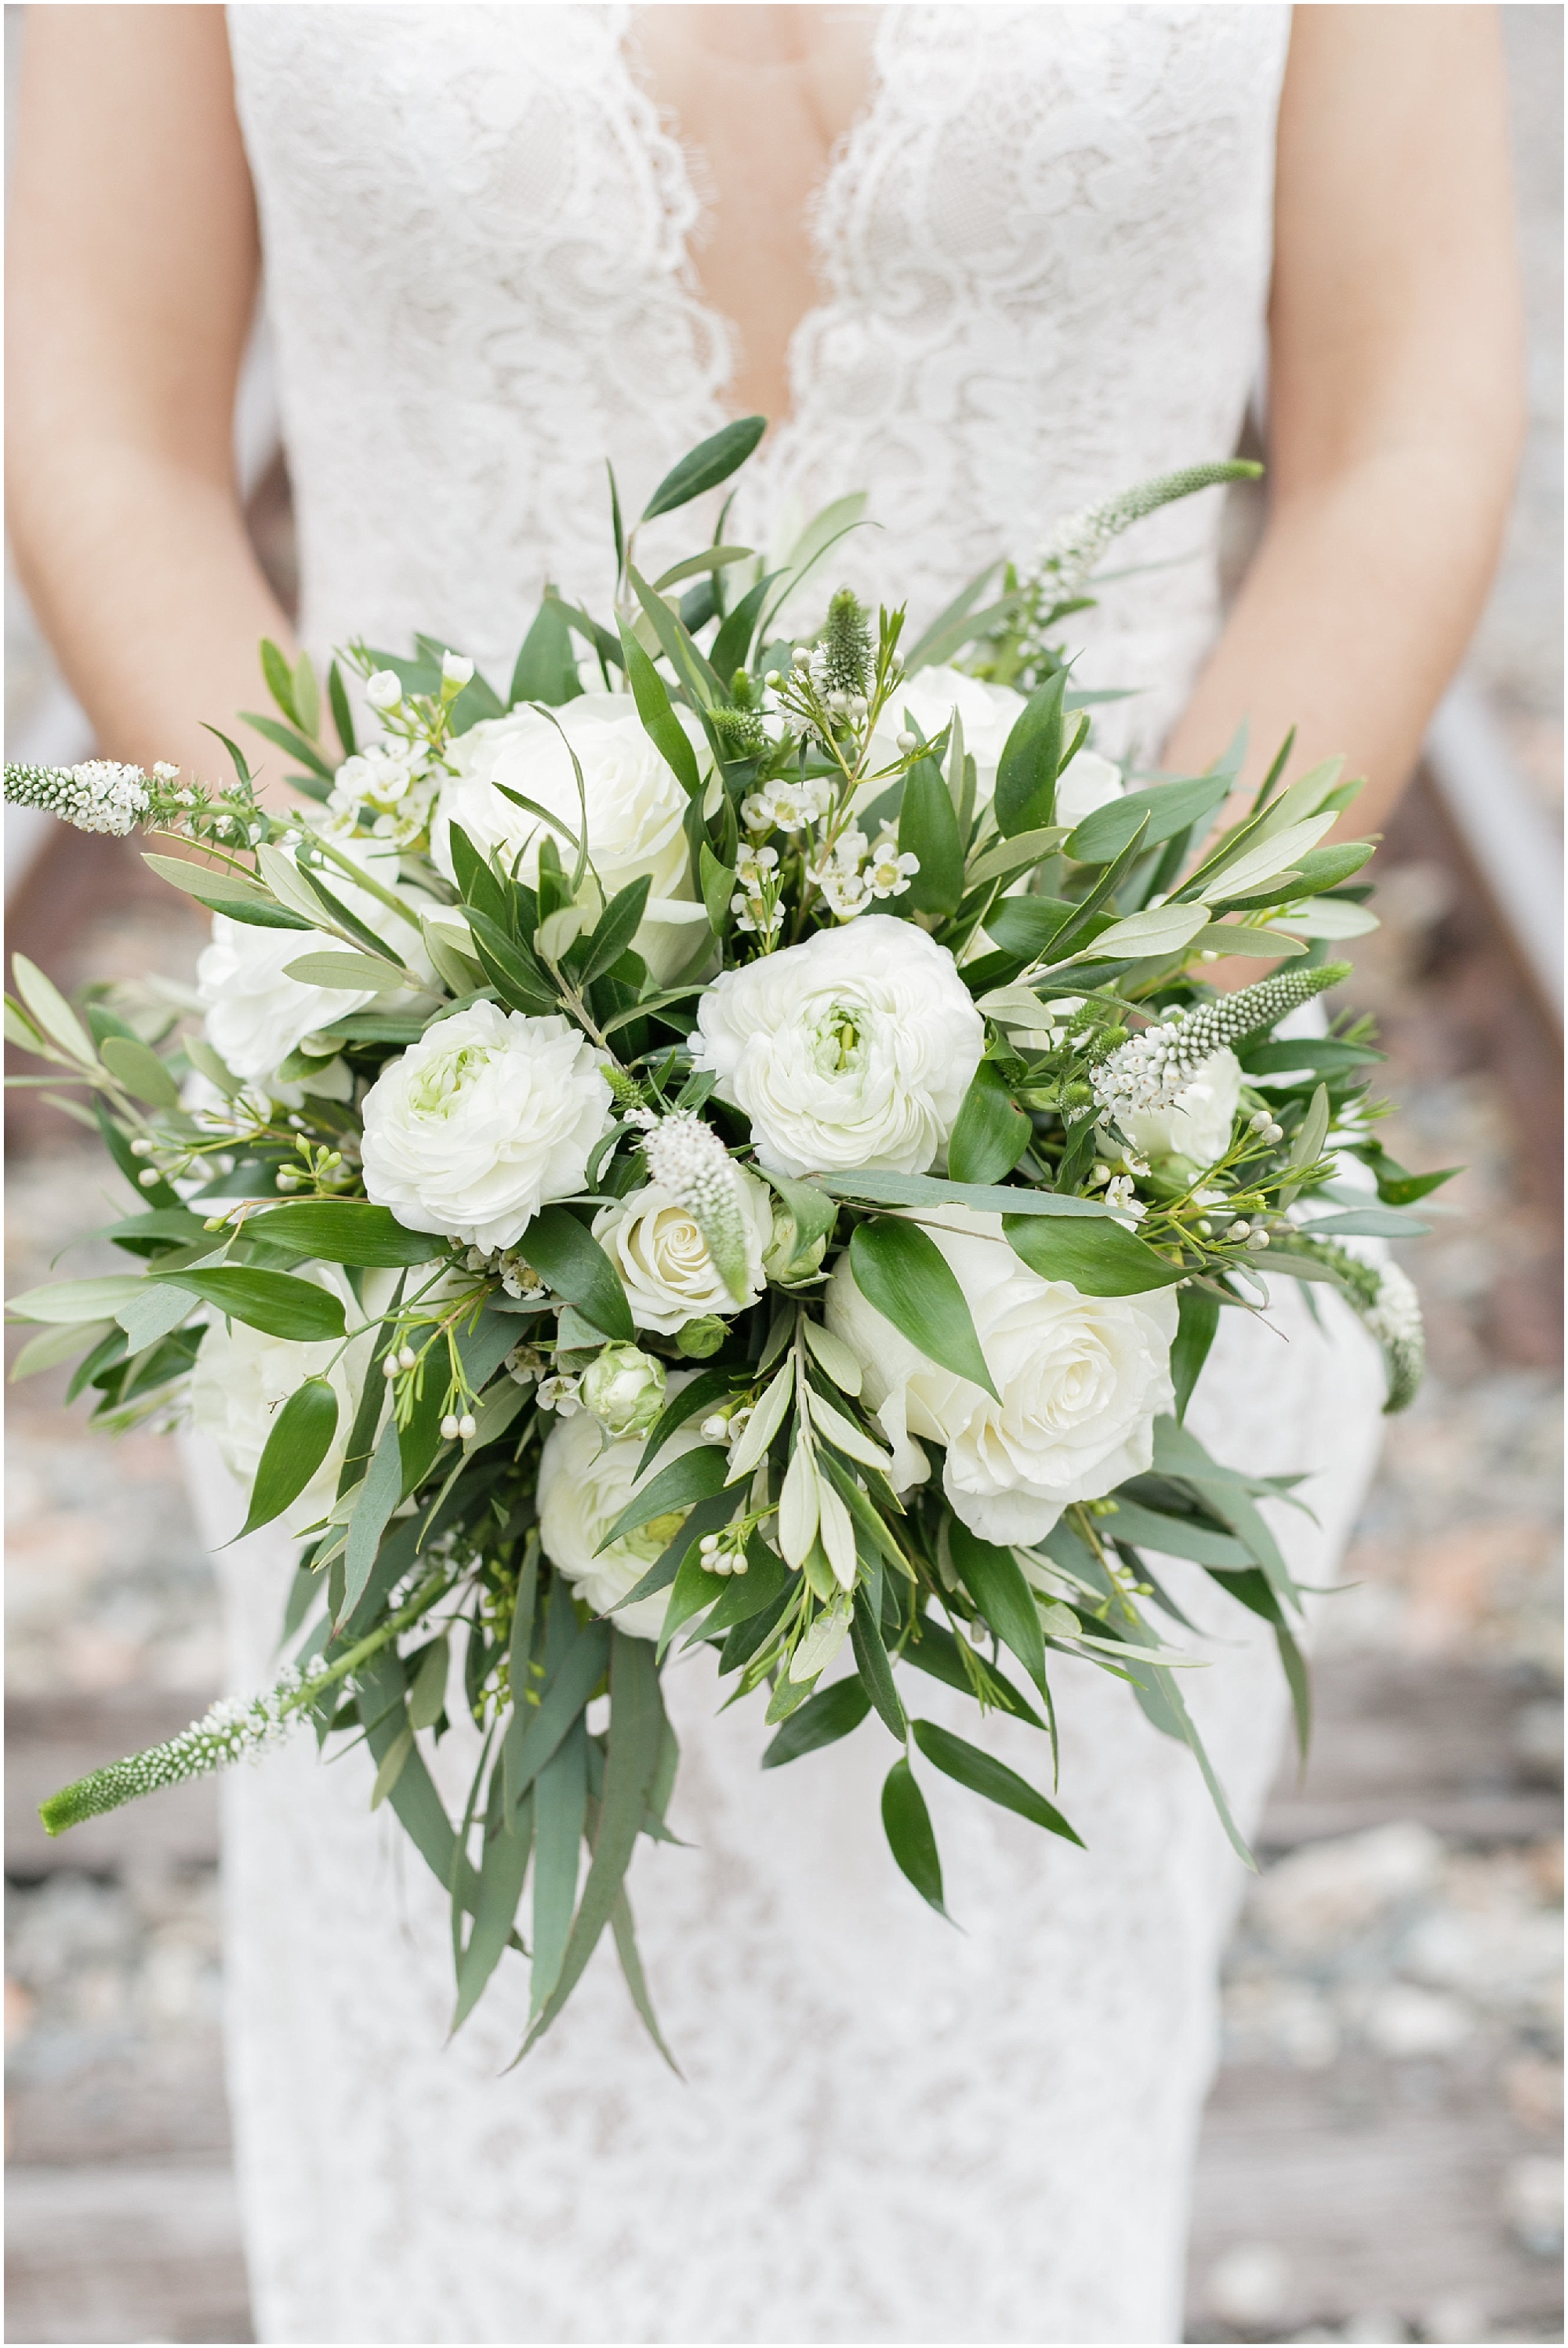 Wedding bouquet with white roses